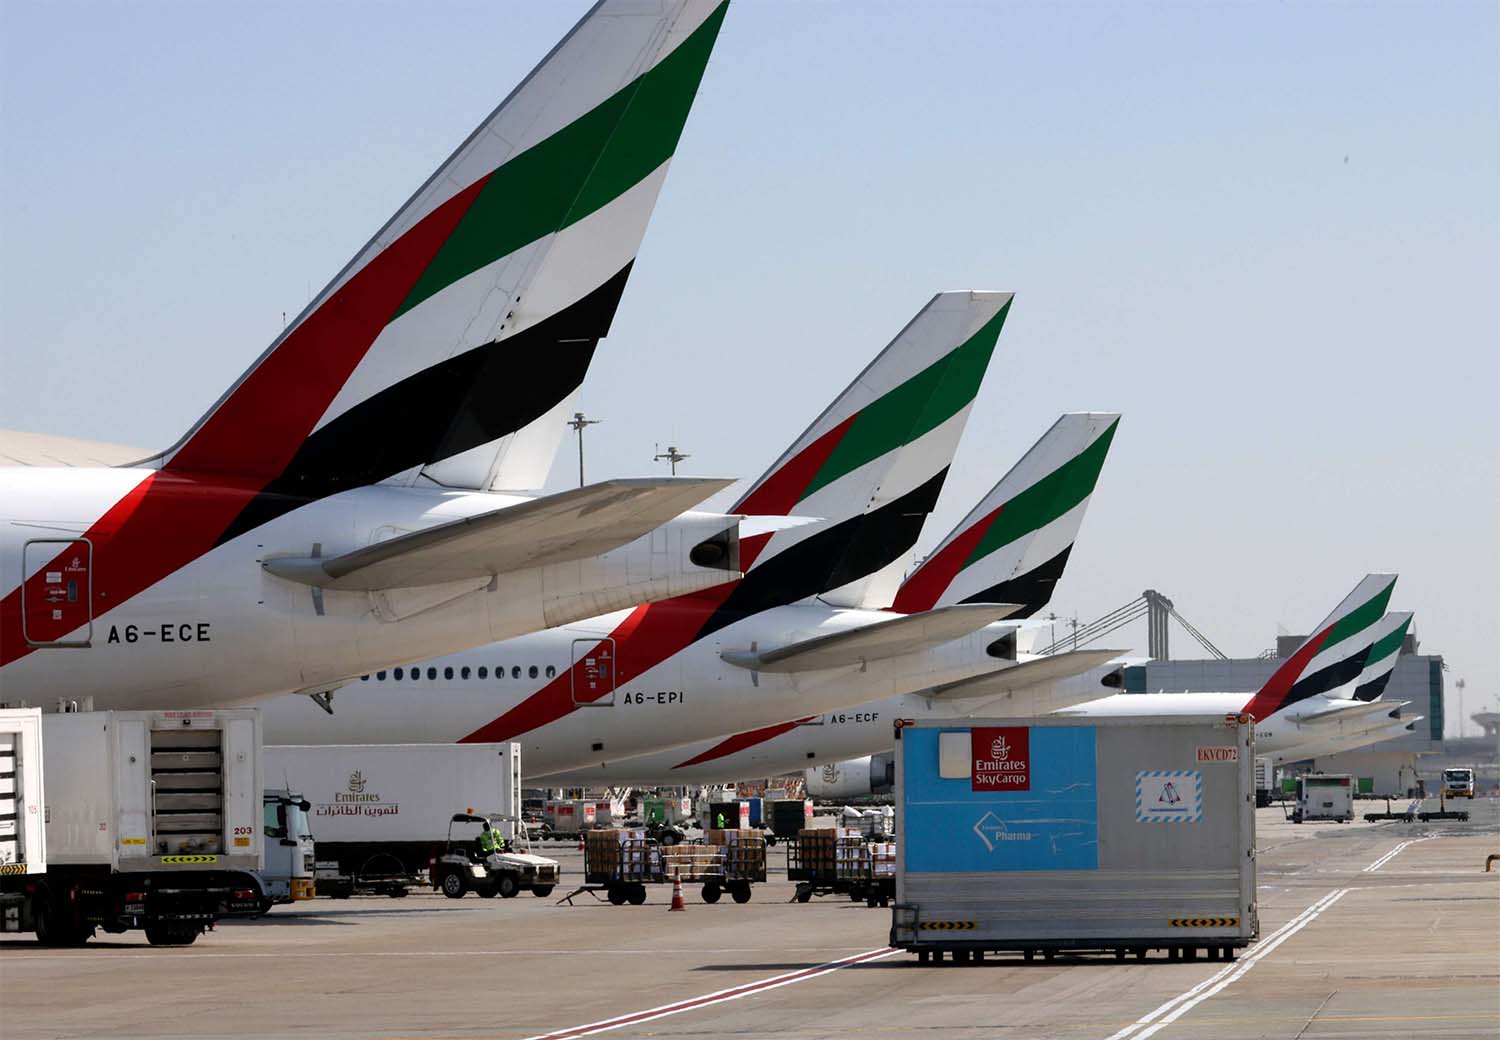 Emirates was thrown a $2 billion lifeline from the government to stave off a liquidity crunch in 2020